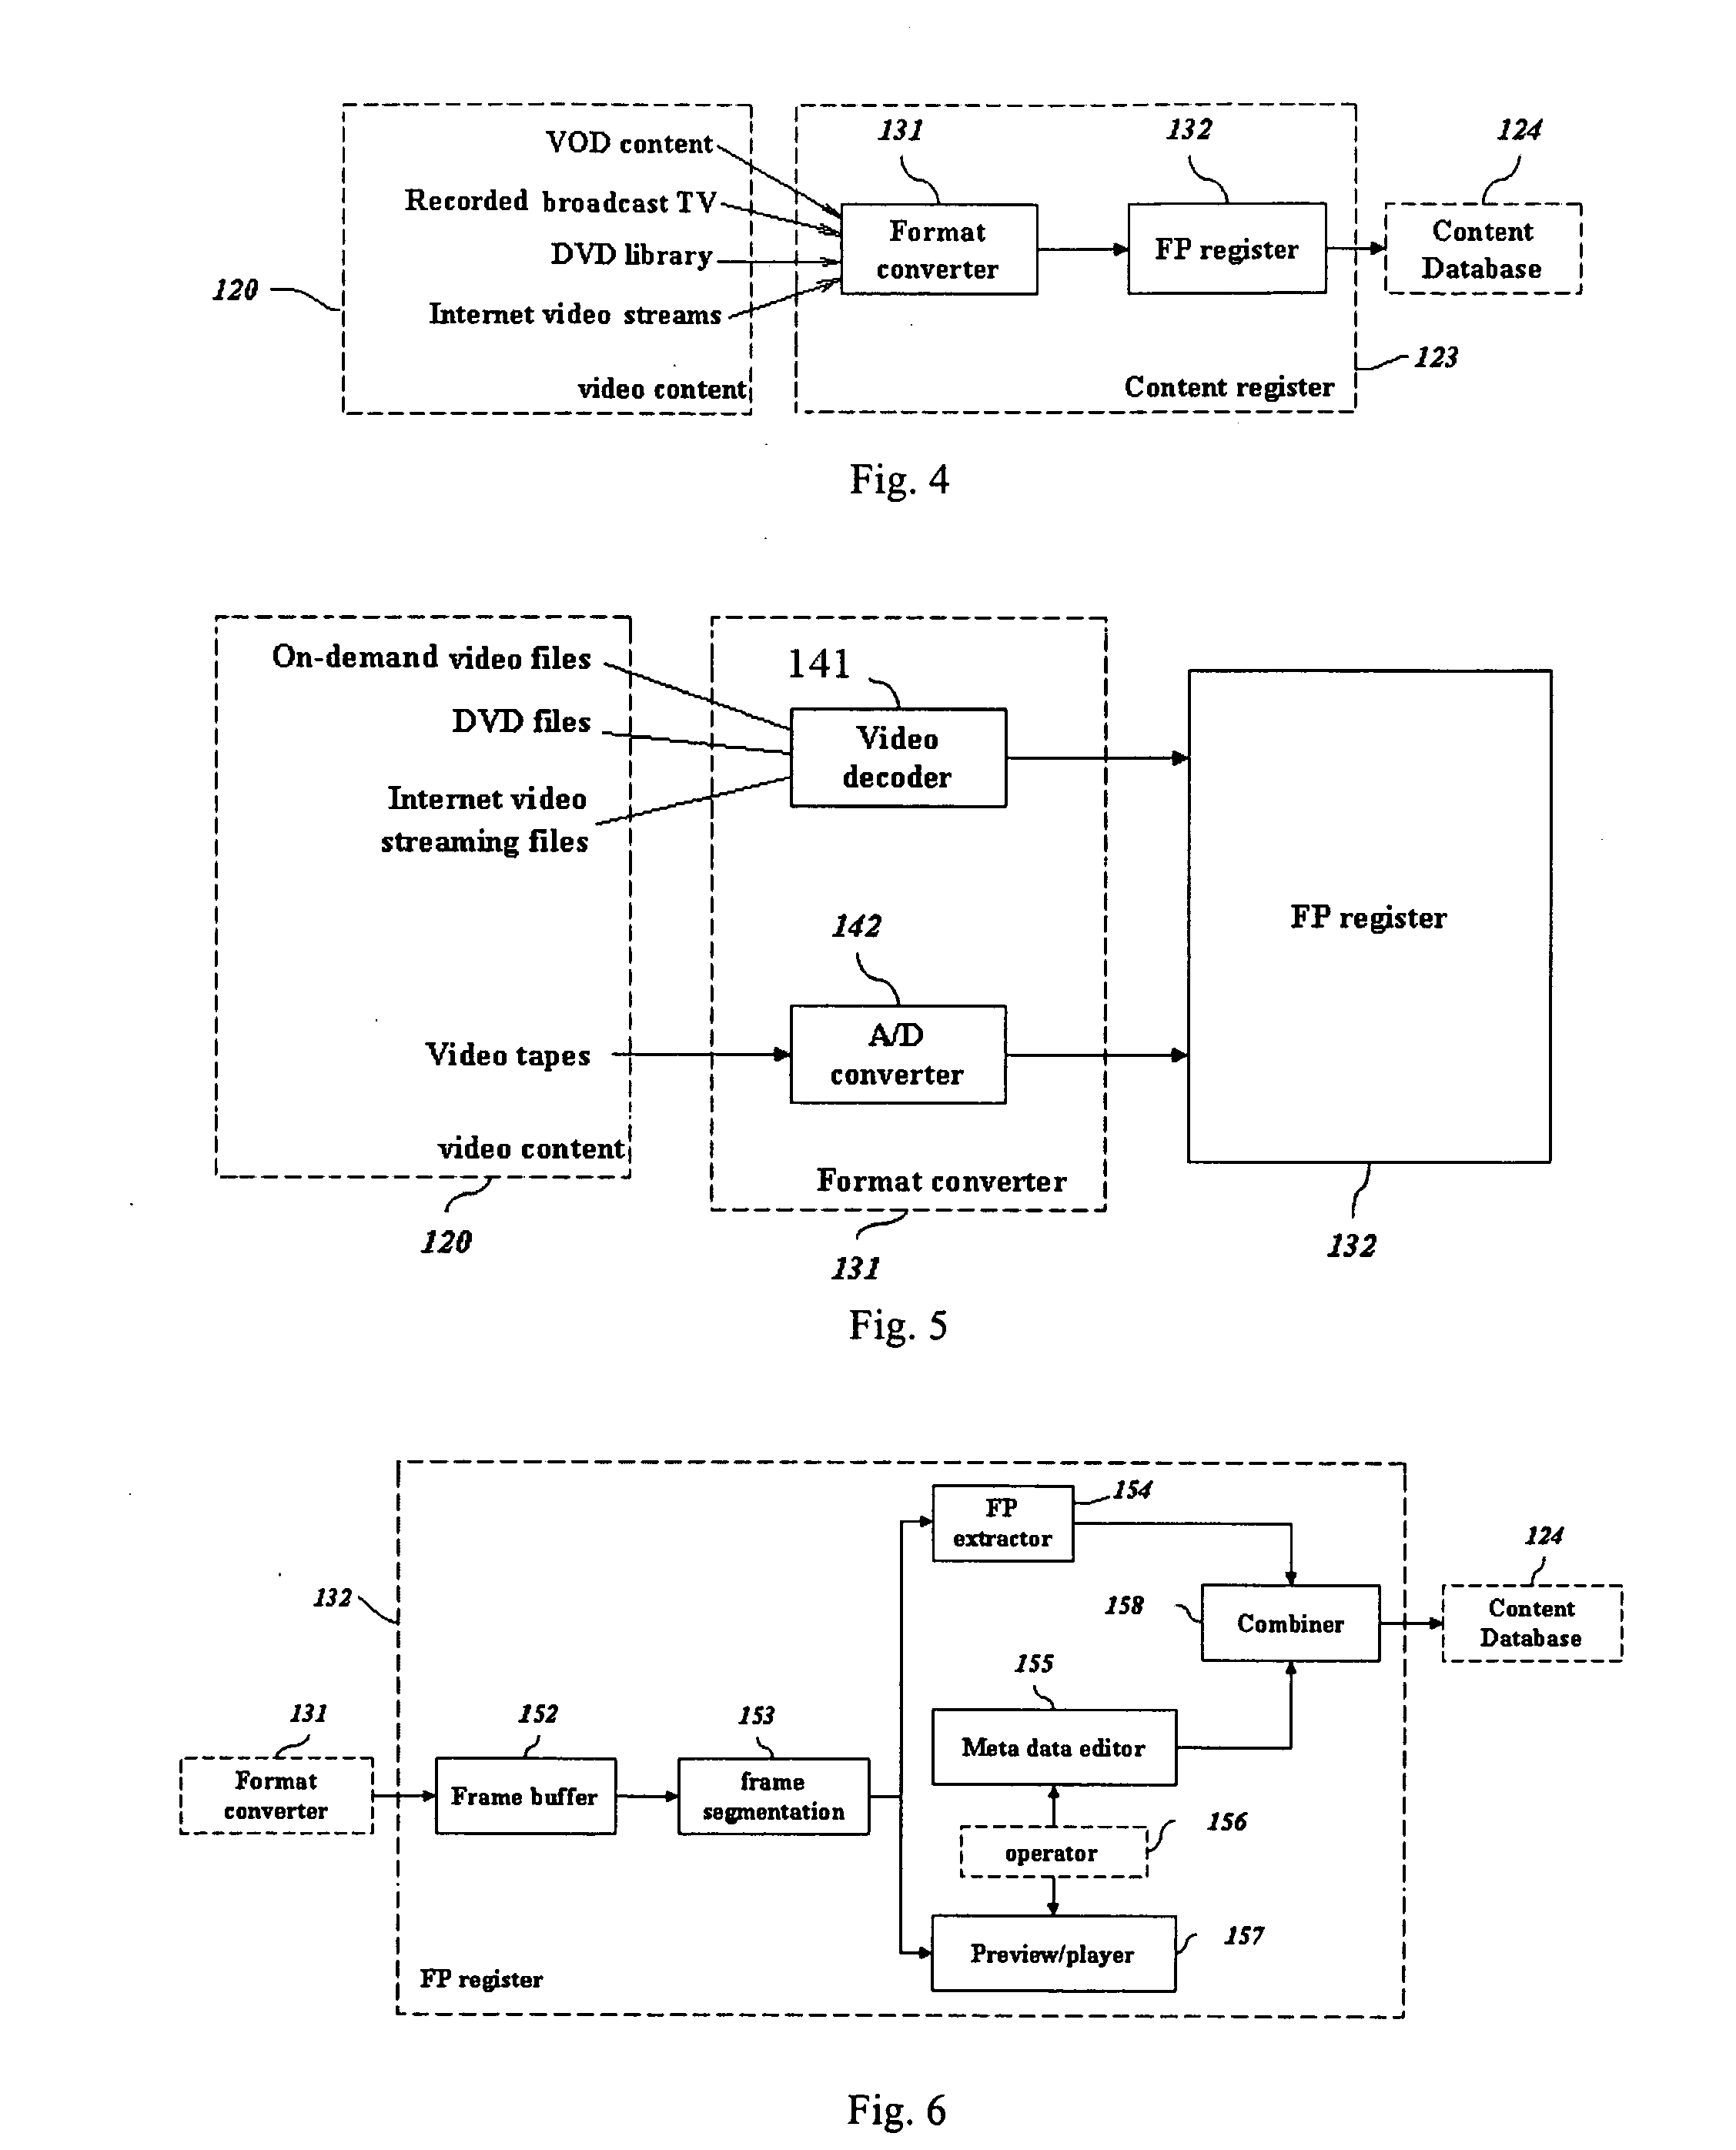 Method for Automatically Monitoring Viewing Activities of Television Signals